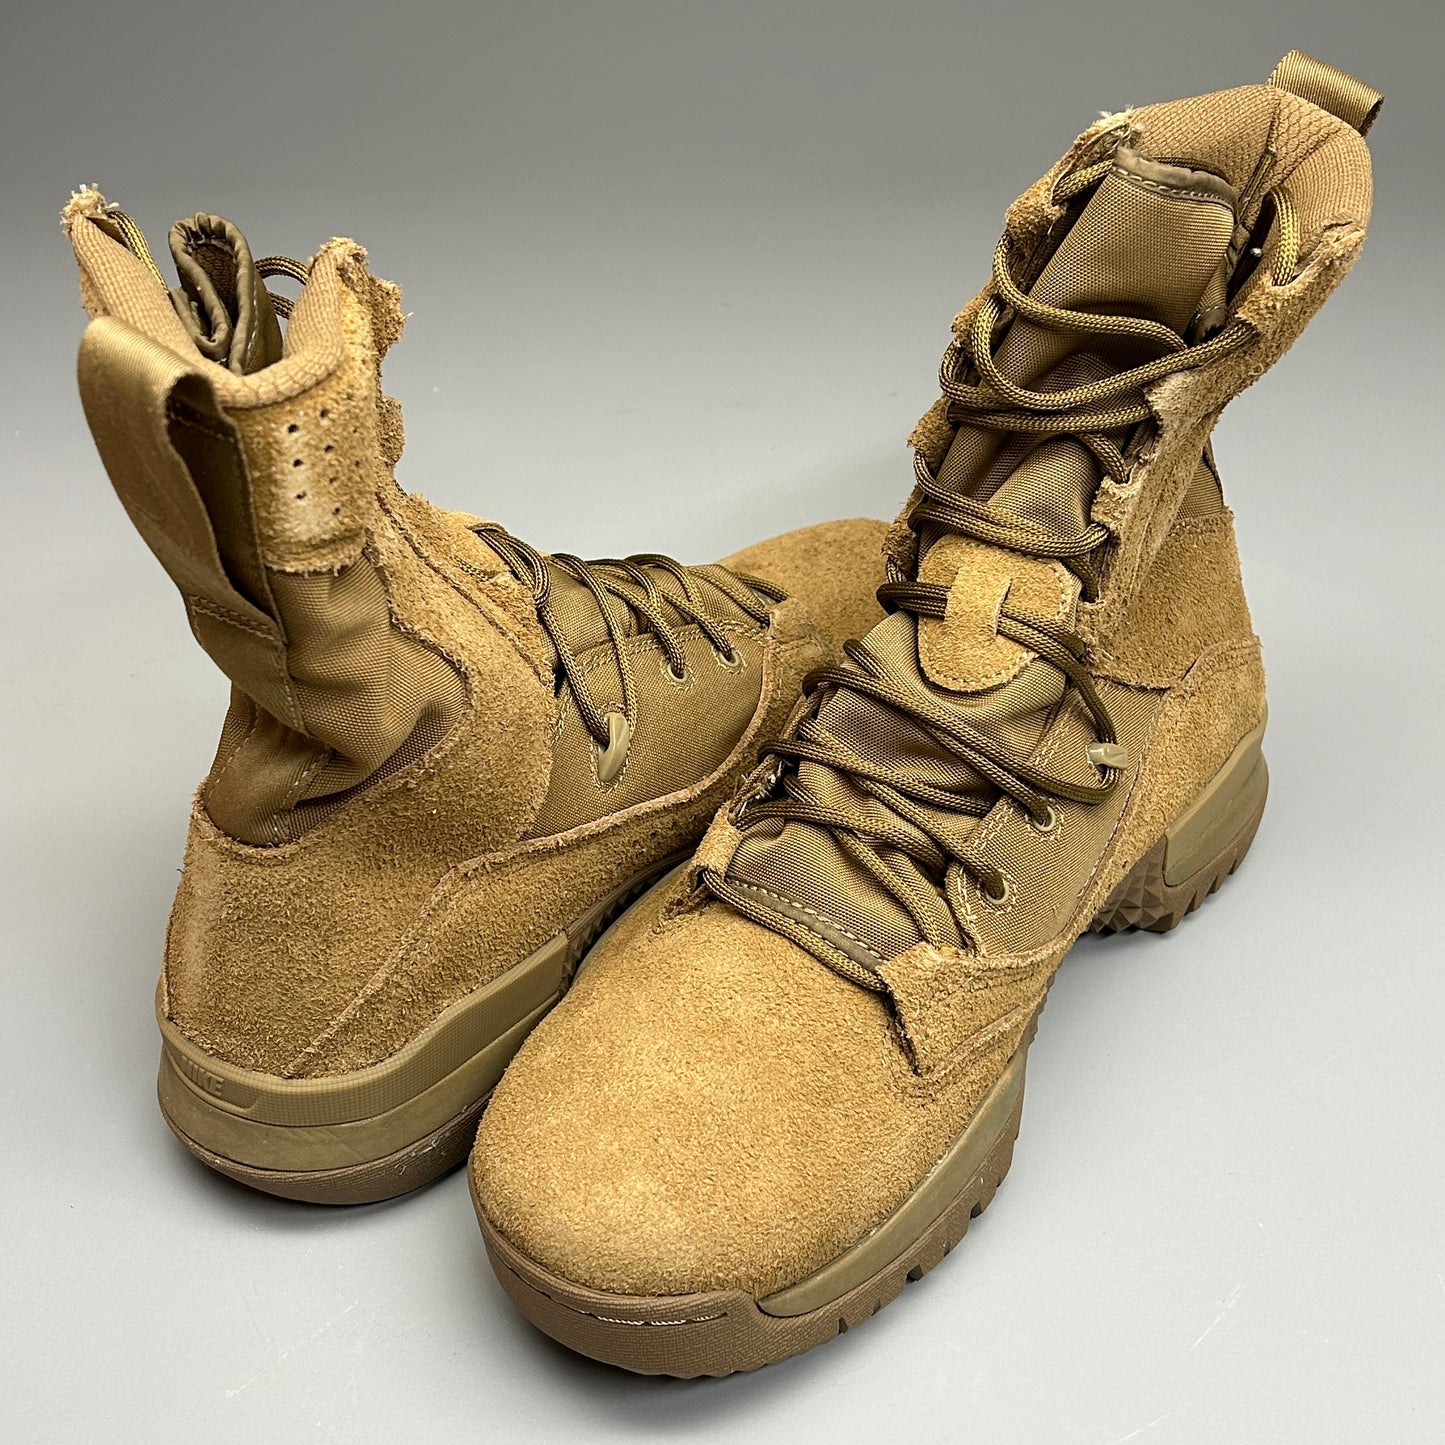 Nike SFB Field 2 8 Leather Tactical Boots.